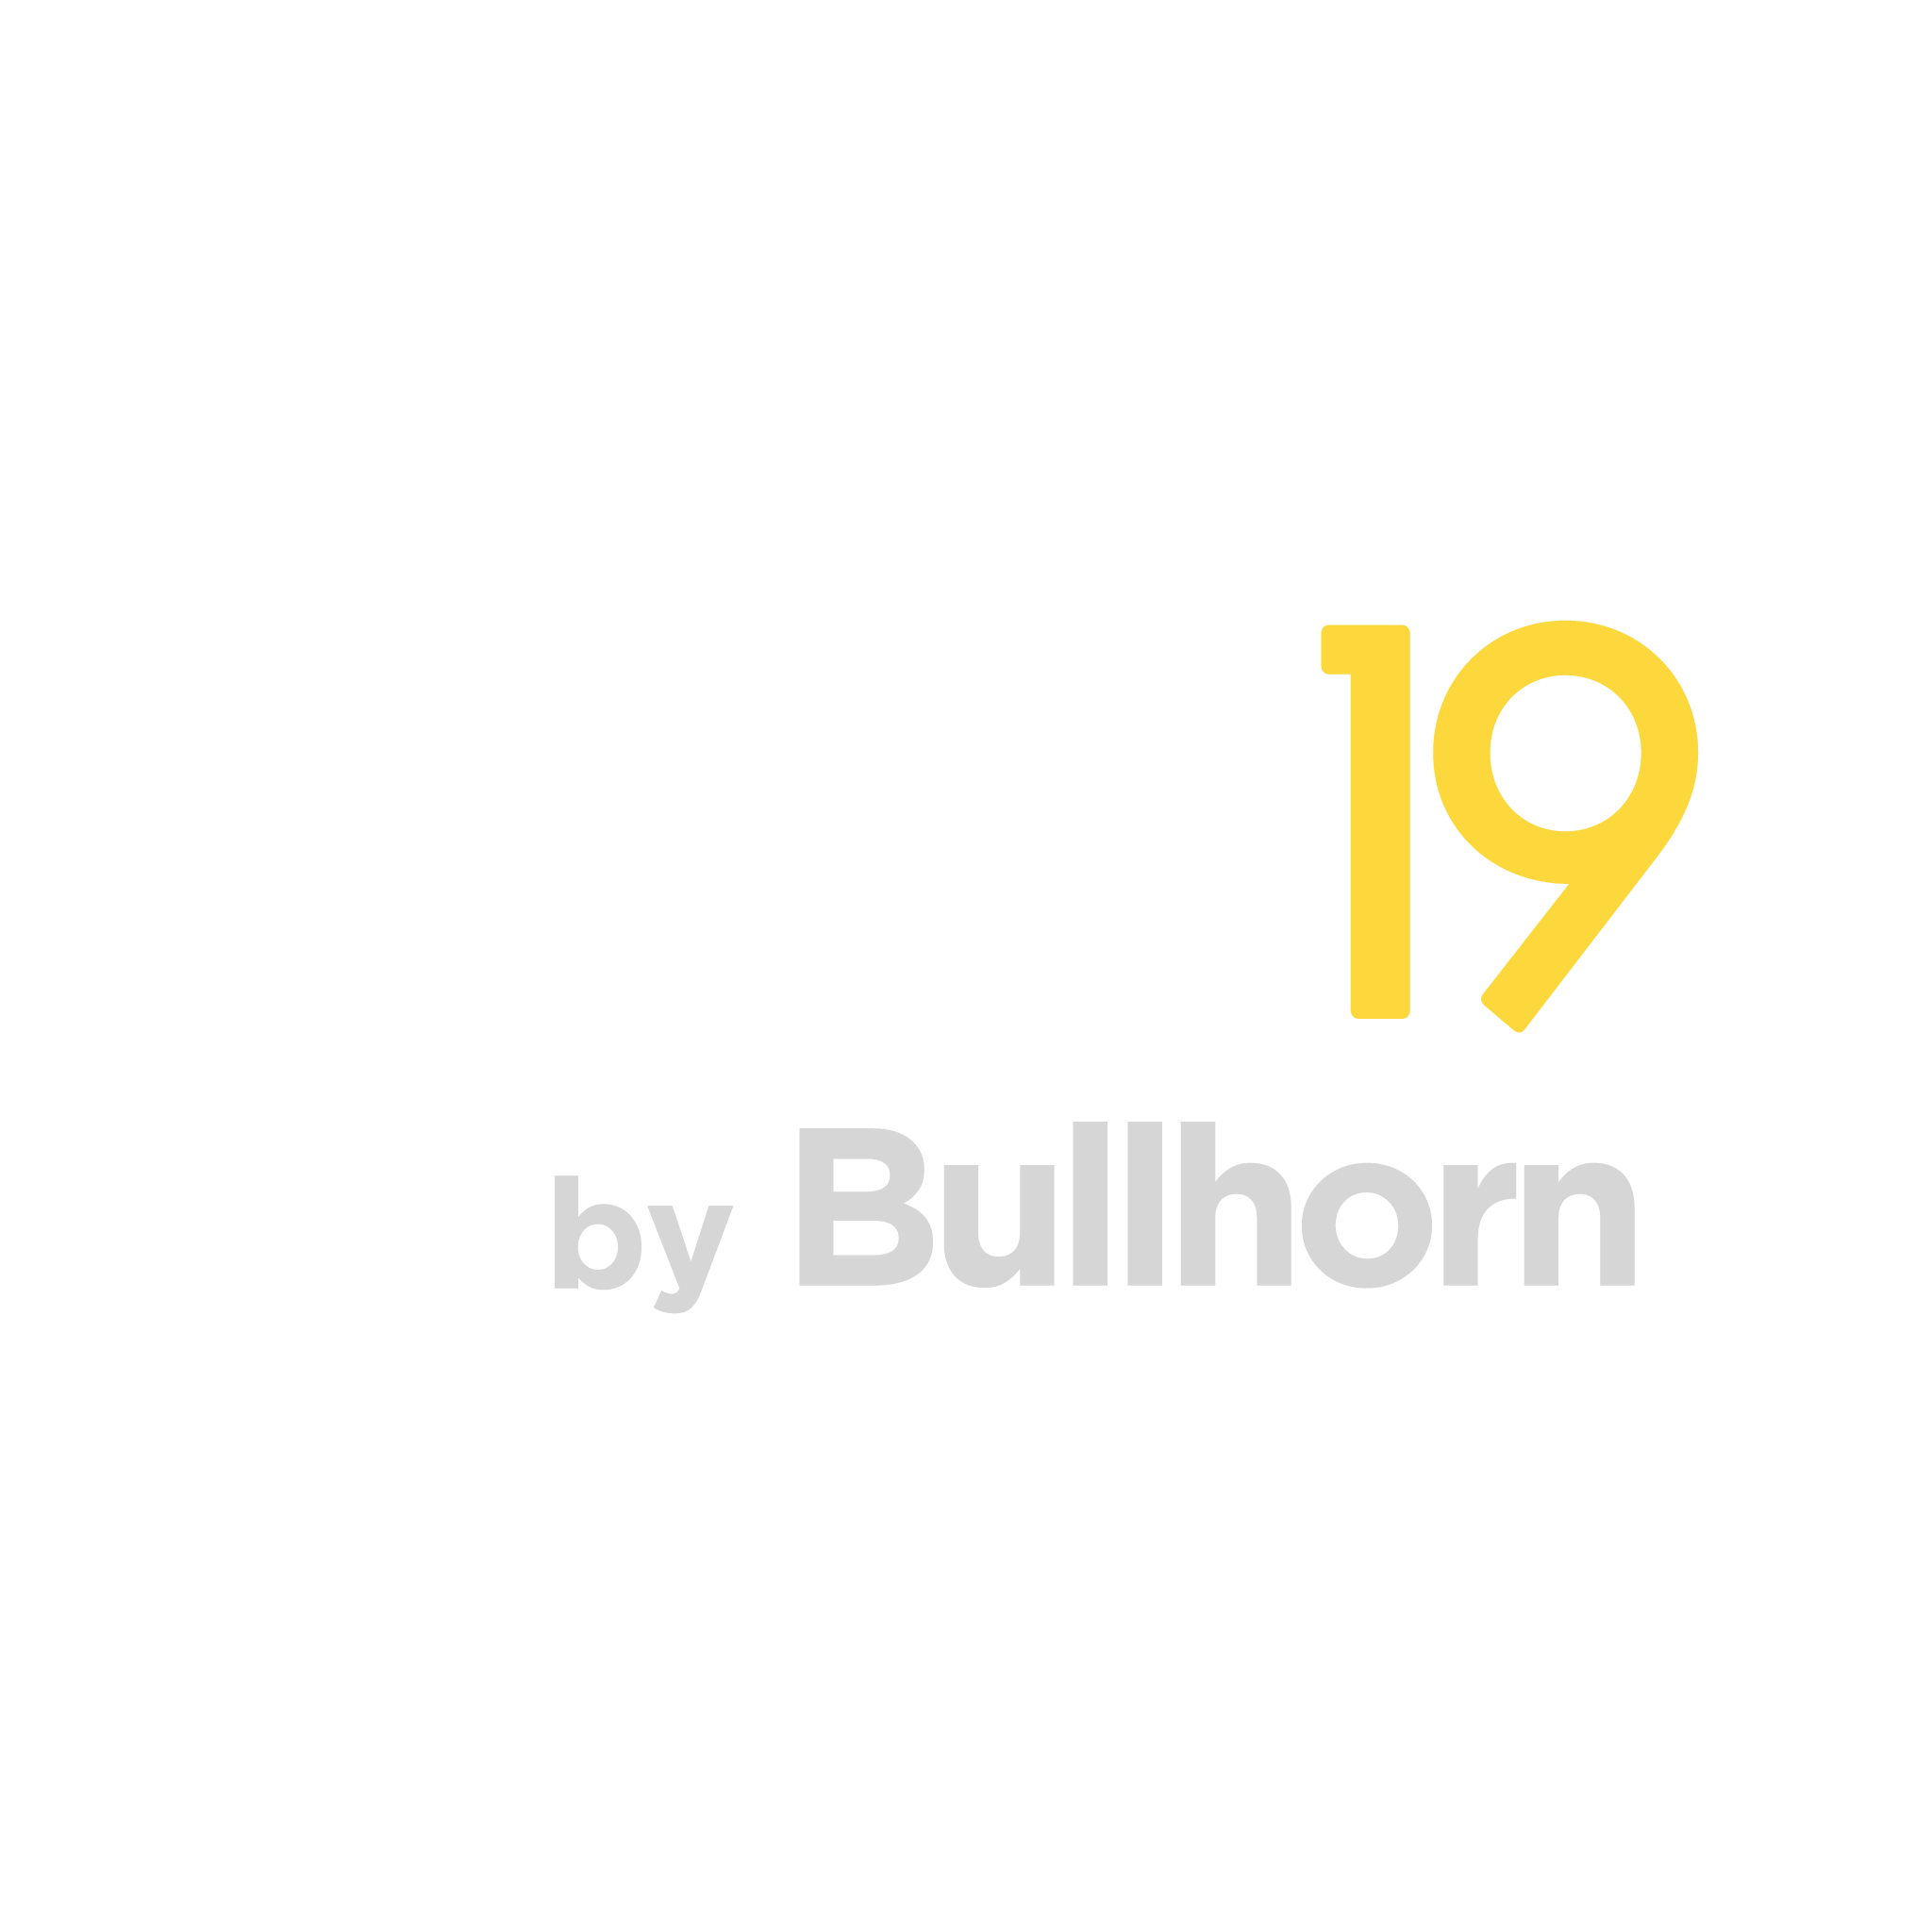 cube19 | The #1 Bullhorn Analytics and Reporting Platform